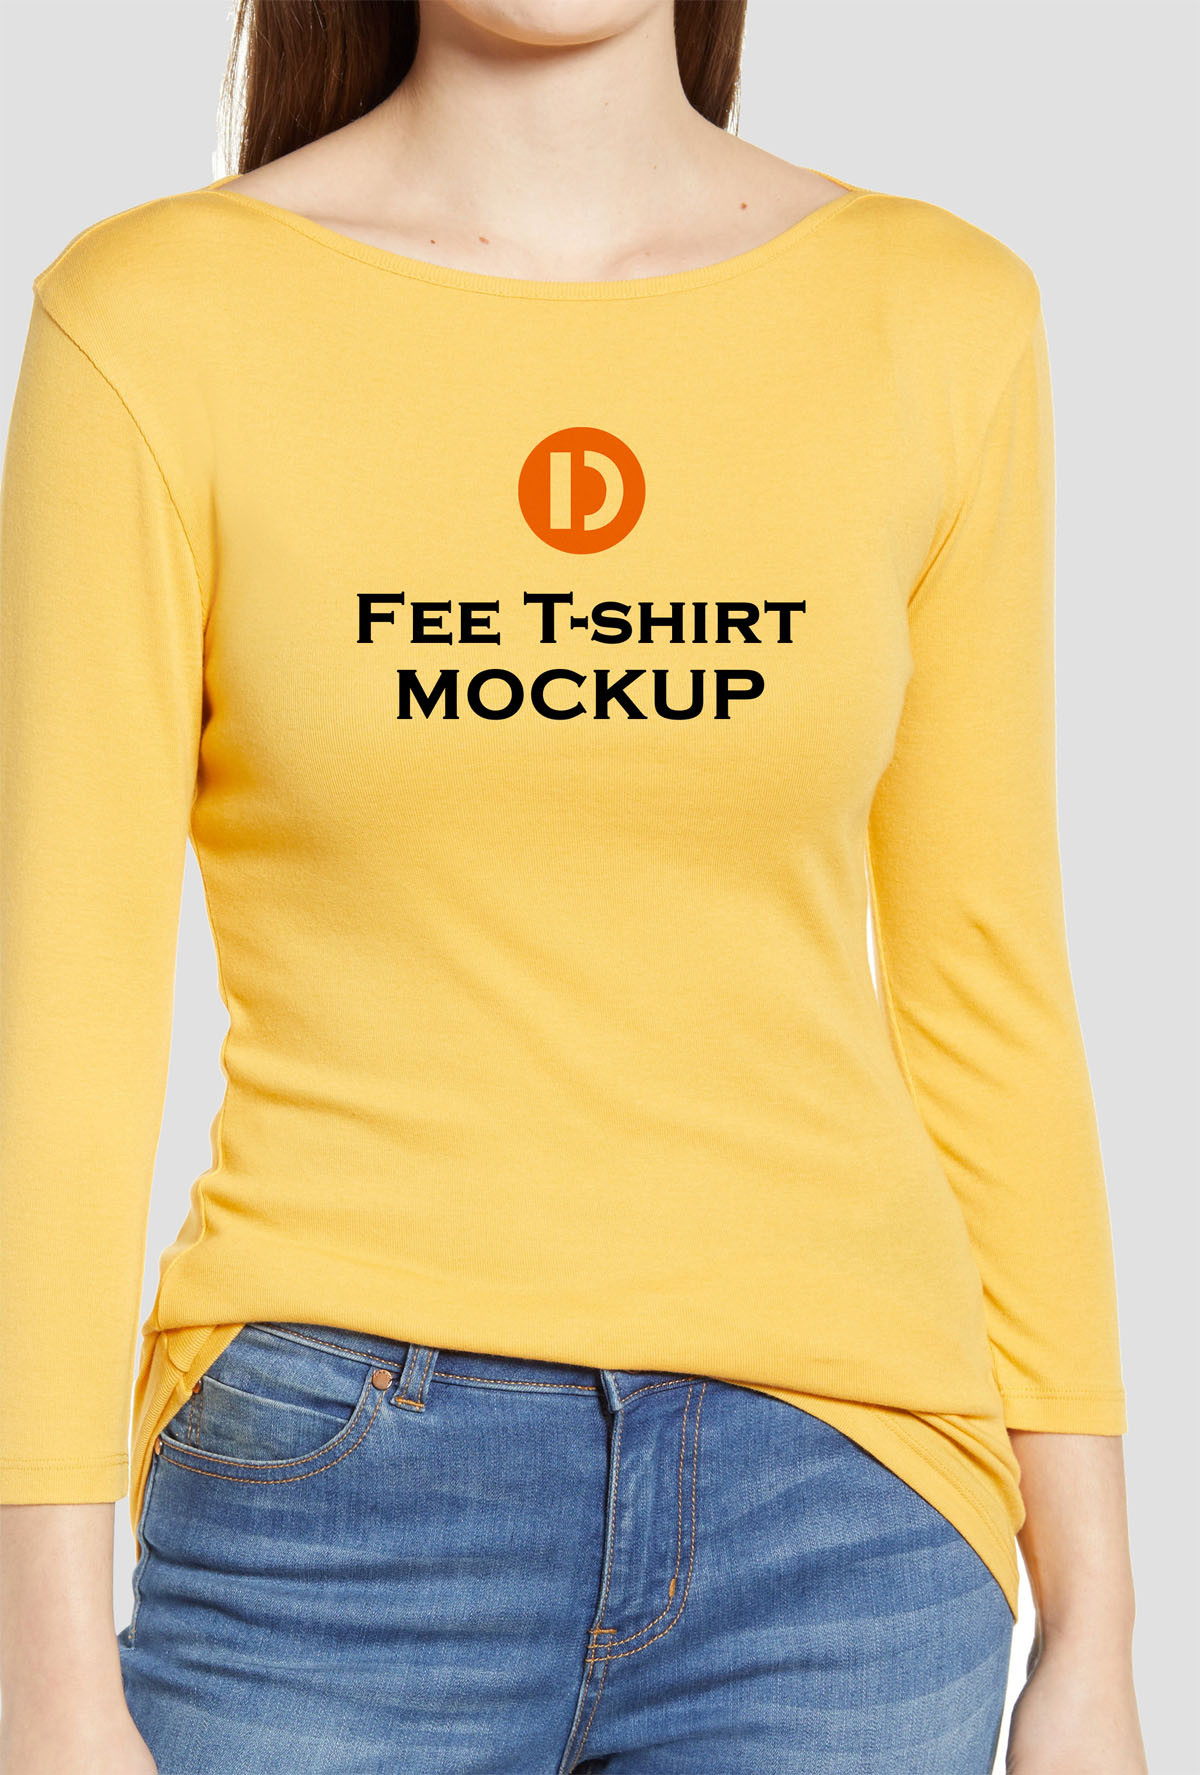 Free Woman T-Shirt Mockup - Find the Perfect Creative ...